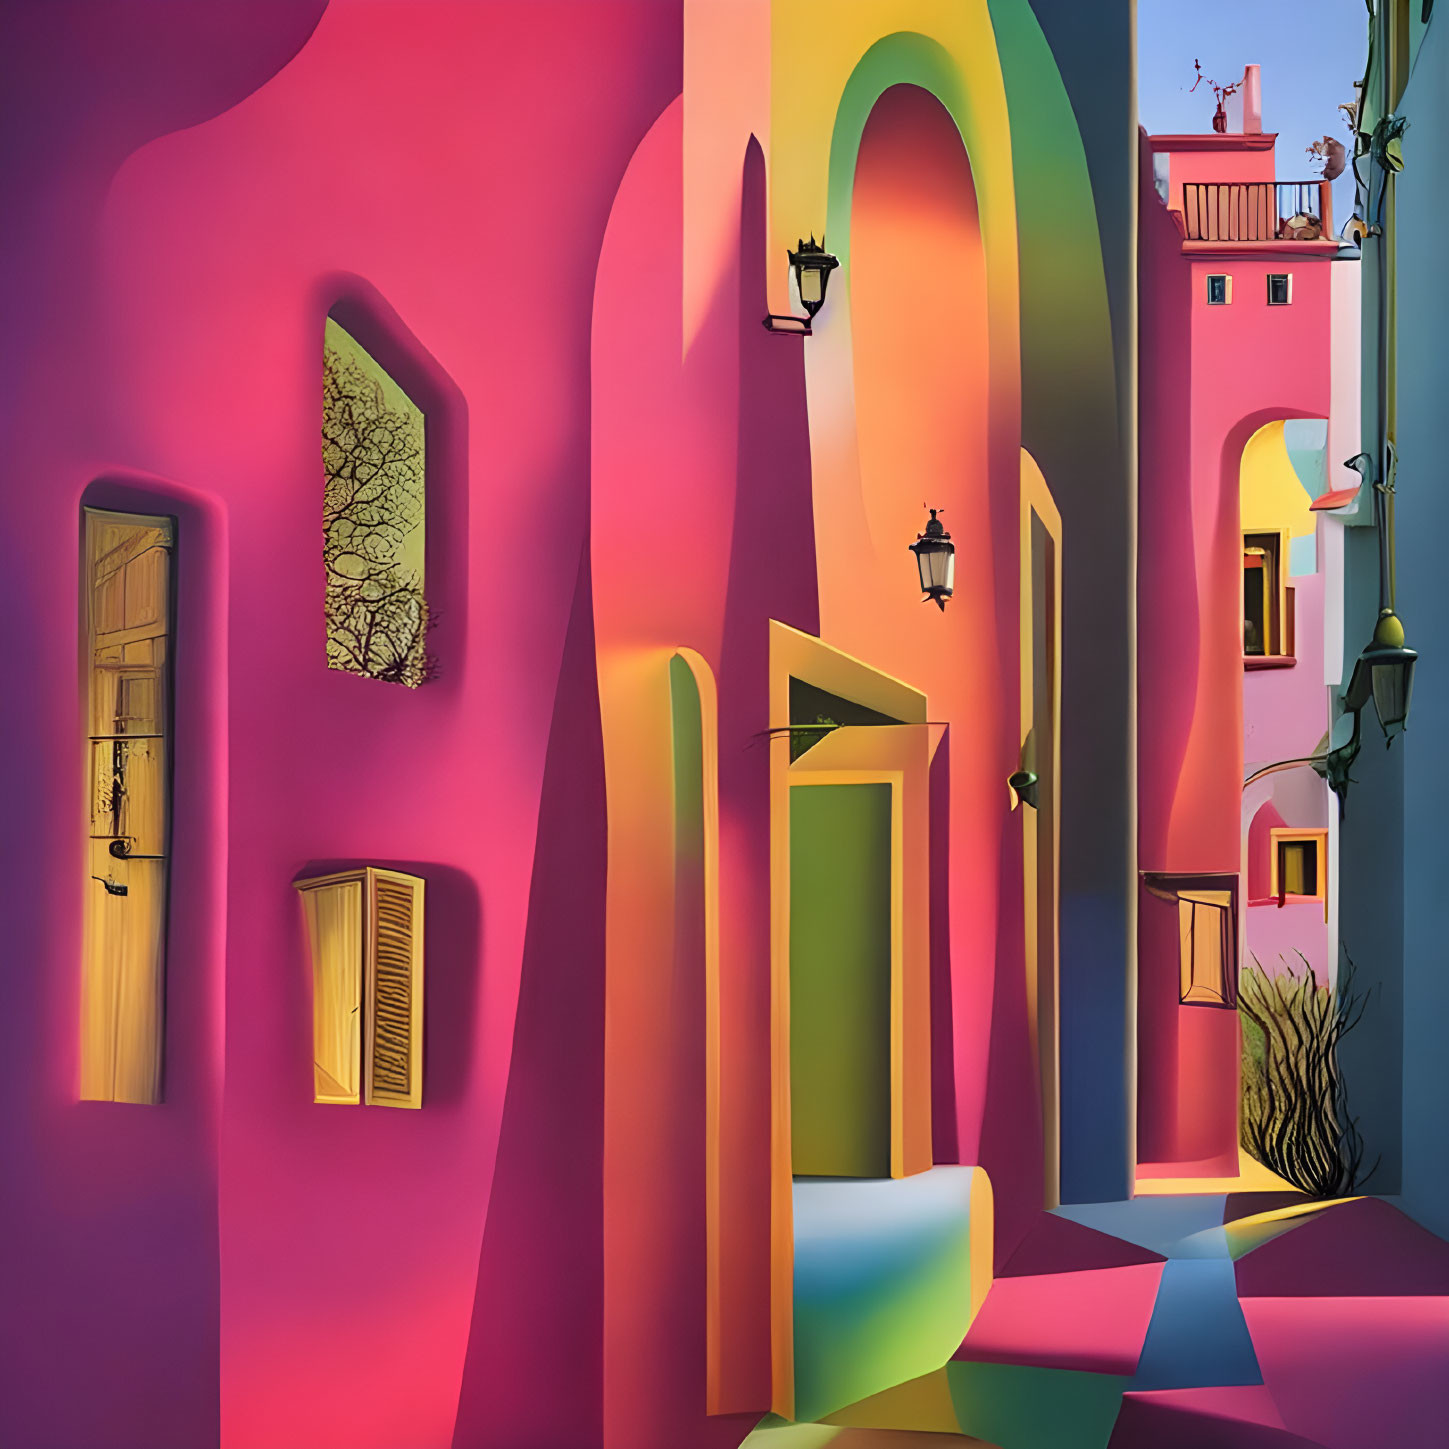 Colorful surreal street illustration with stylized architecture.